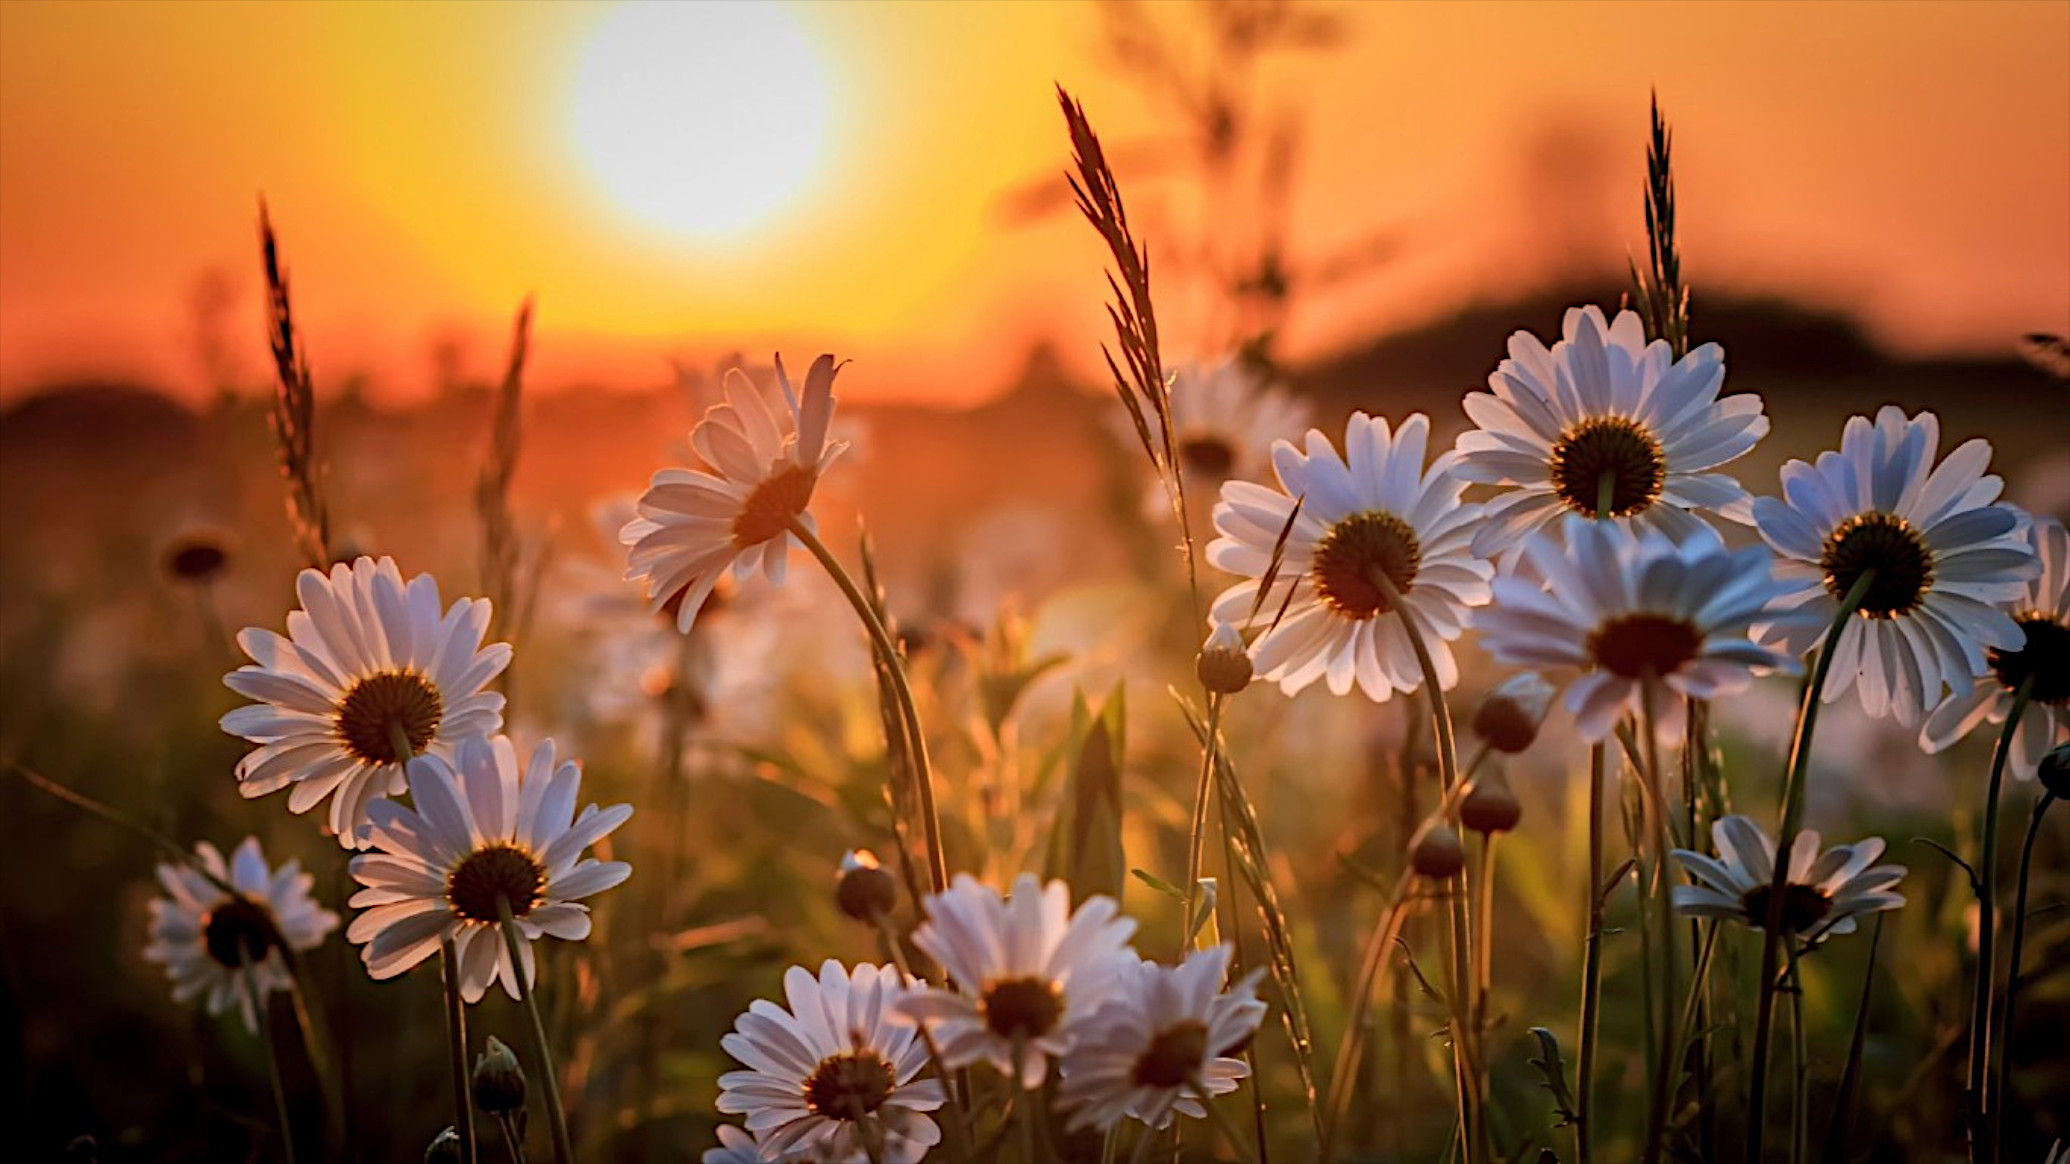 Sunset on the background of a daisy field